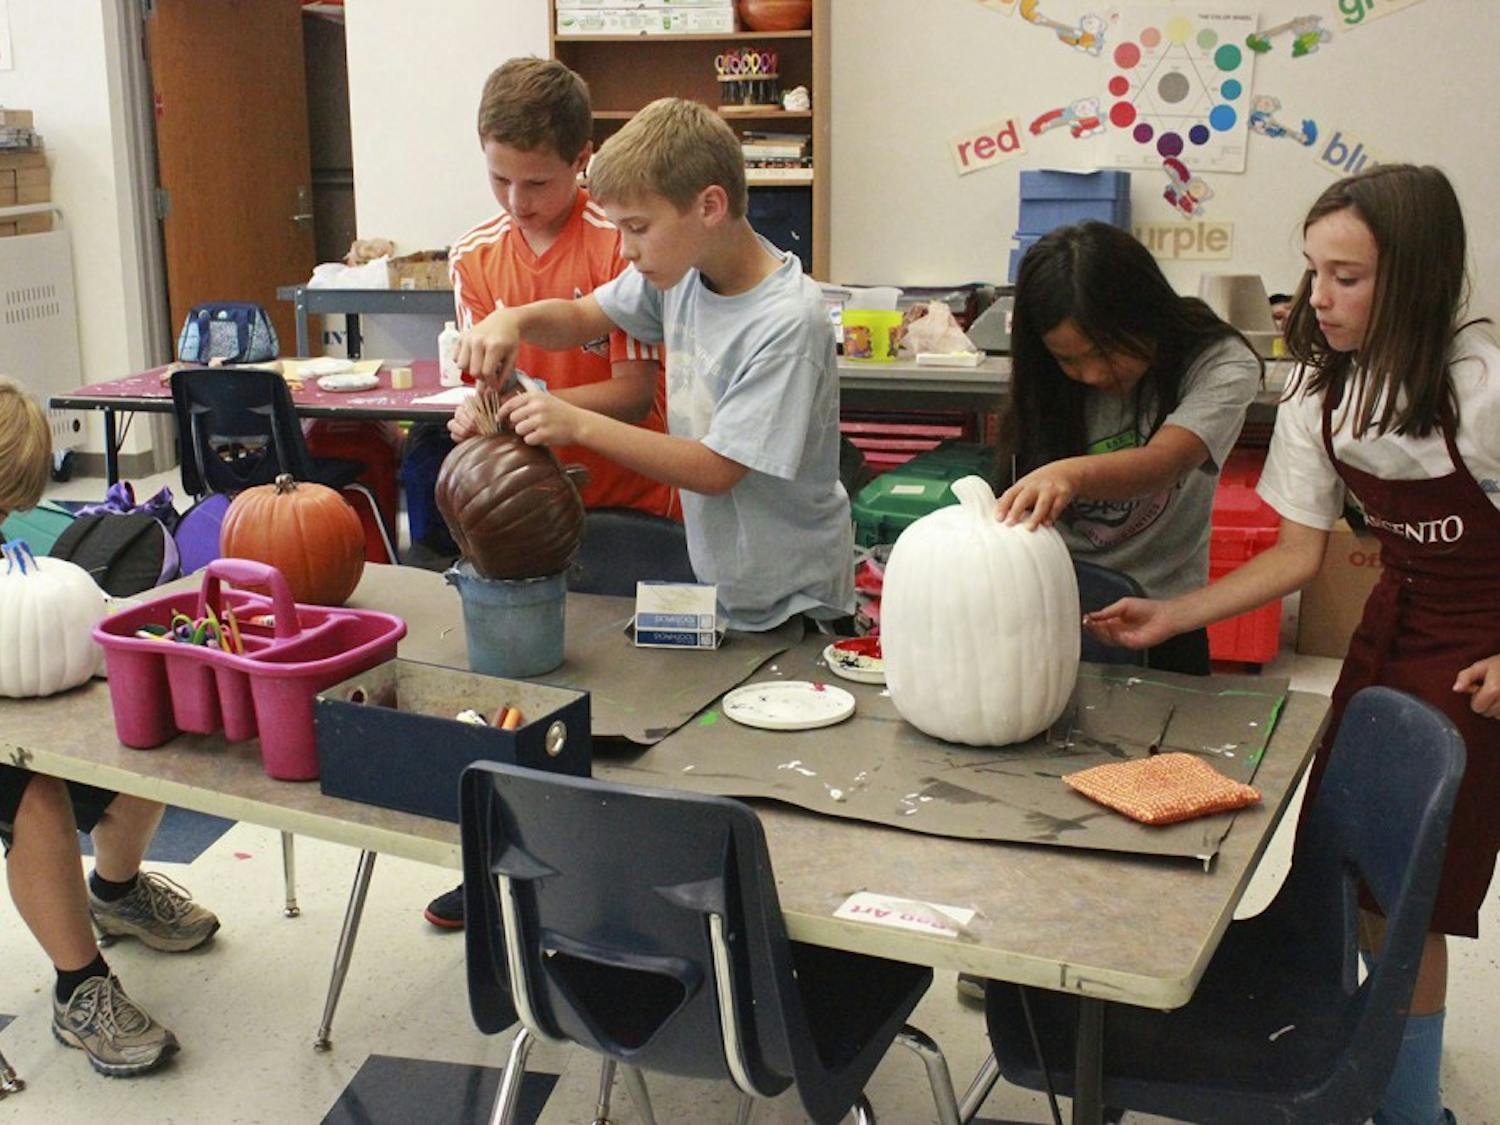 5th grade Art Club students at Morris Grove Elementary painted pumpkins on Tuesday after school for a pumpkin sale that will raise money for United Way. Art Club teacher, Mrs. Becky Springer, said the inspiration for the fundraiser came because "I'm just always looking for a creative outlet for the students...and then it just happened to coincide with United Way."